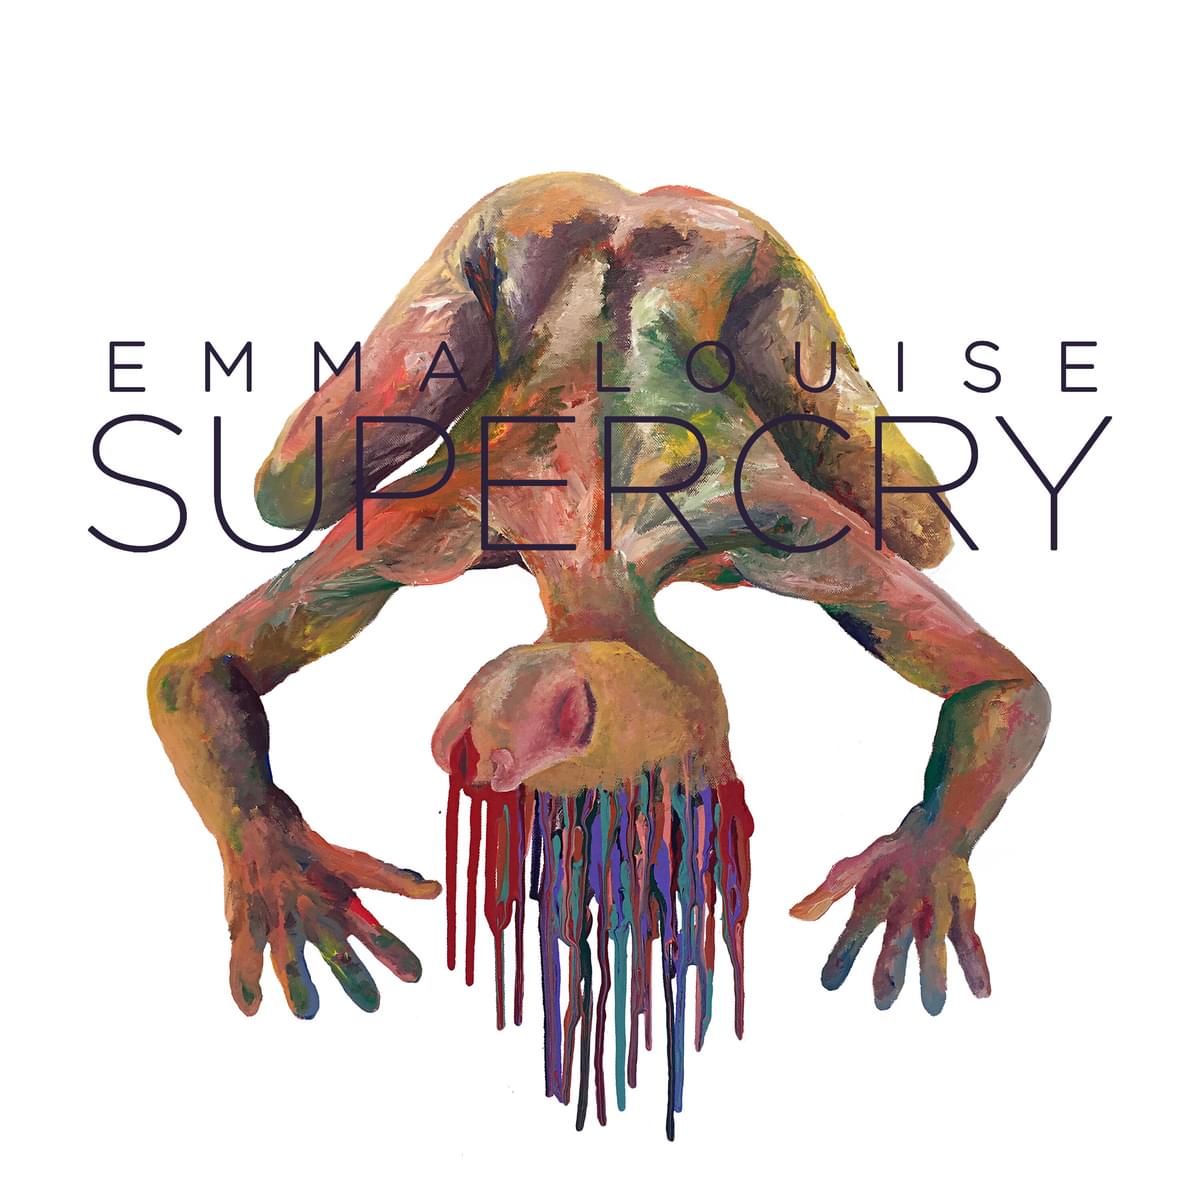 Track By Track: Emma Louise on Supercry